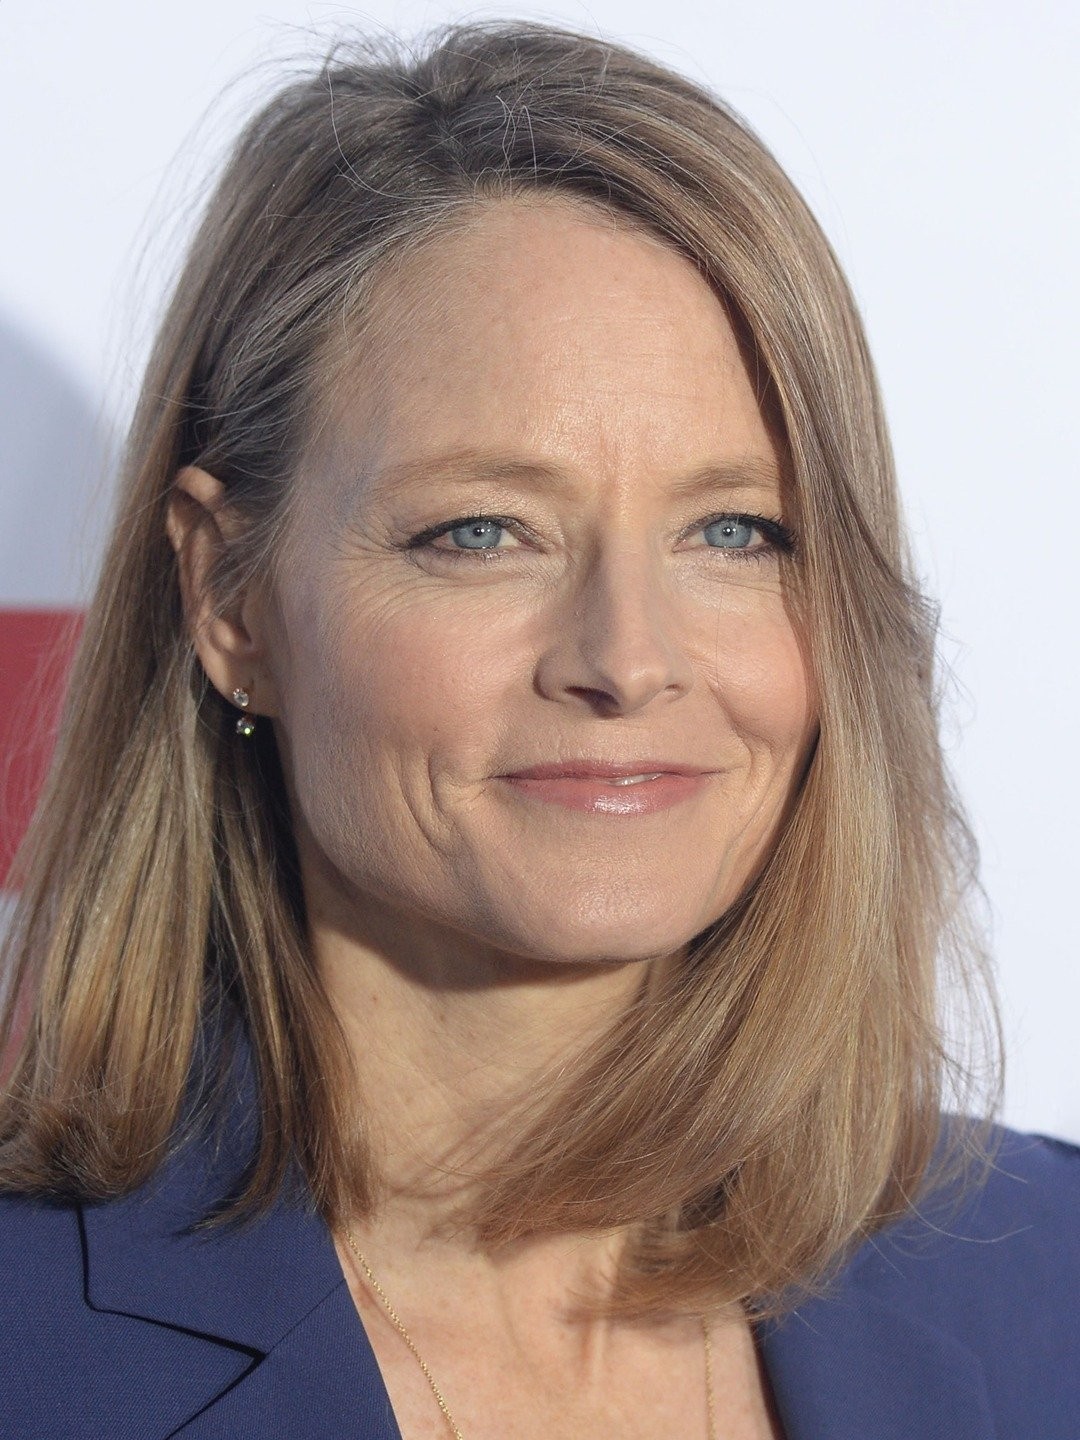 The 10 Best Jodie Foster Movies, Ranked